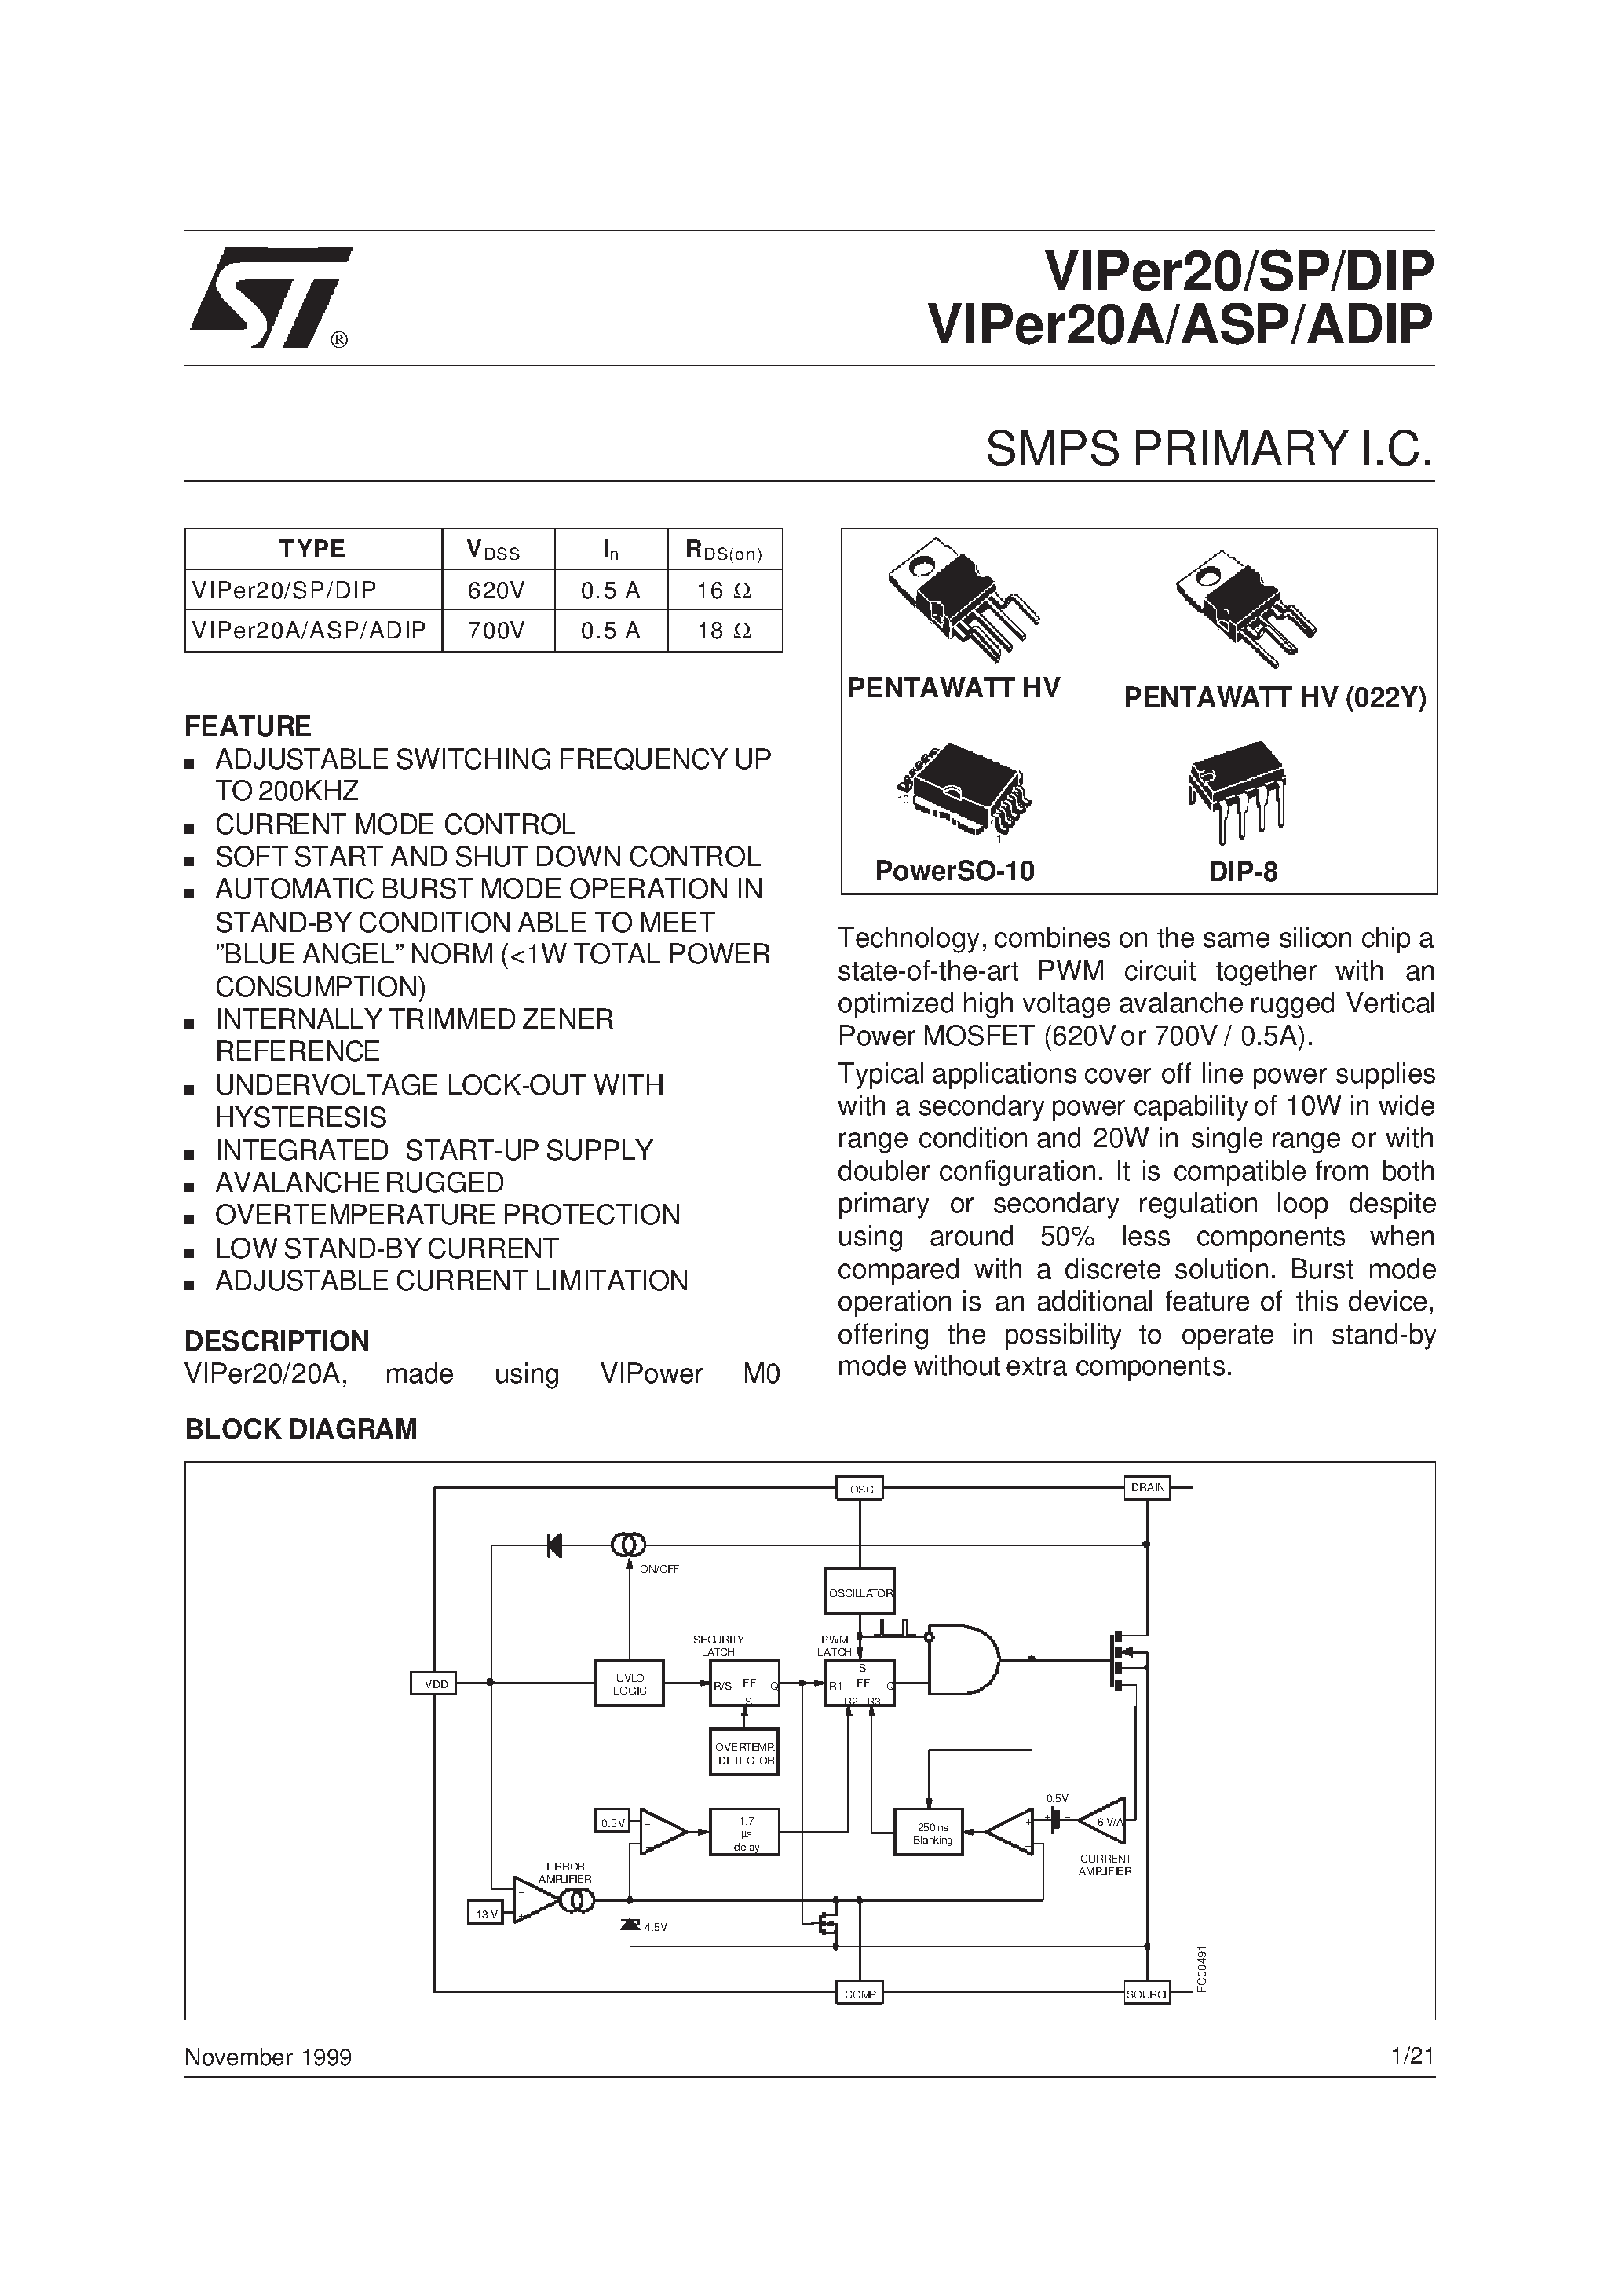 Datasheet VIPer20SP - SMPS PRIMARY I.C. page 1